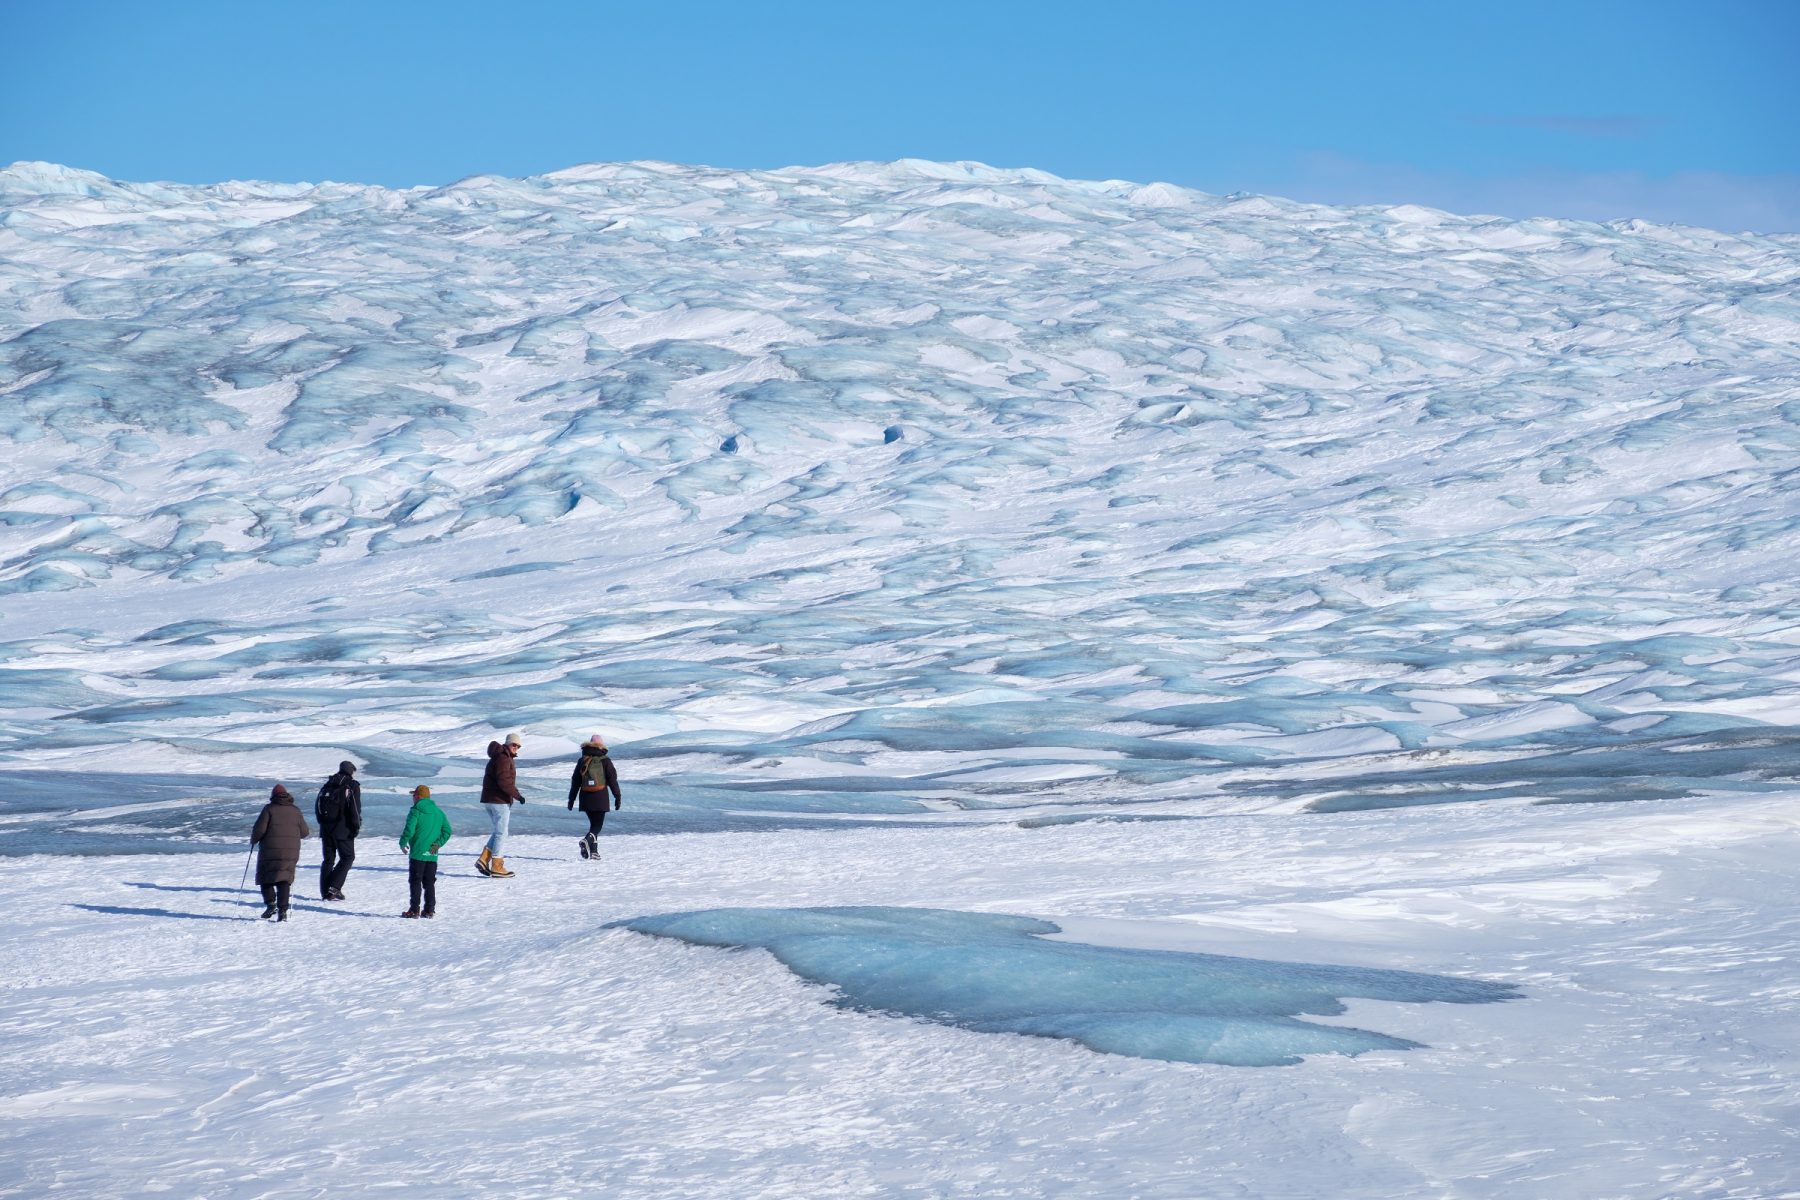 Group heading out onto the Greenland Ice Sheet near Kangerlussuaq